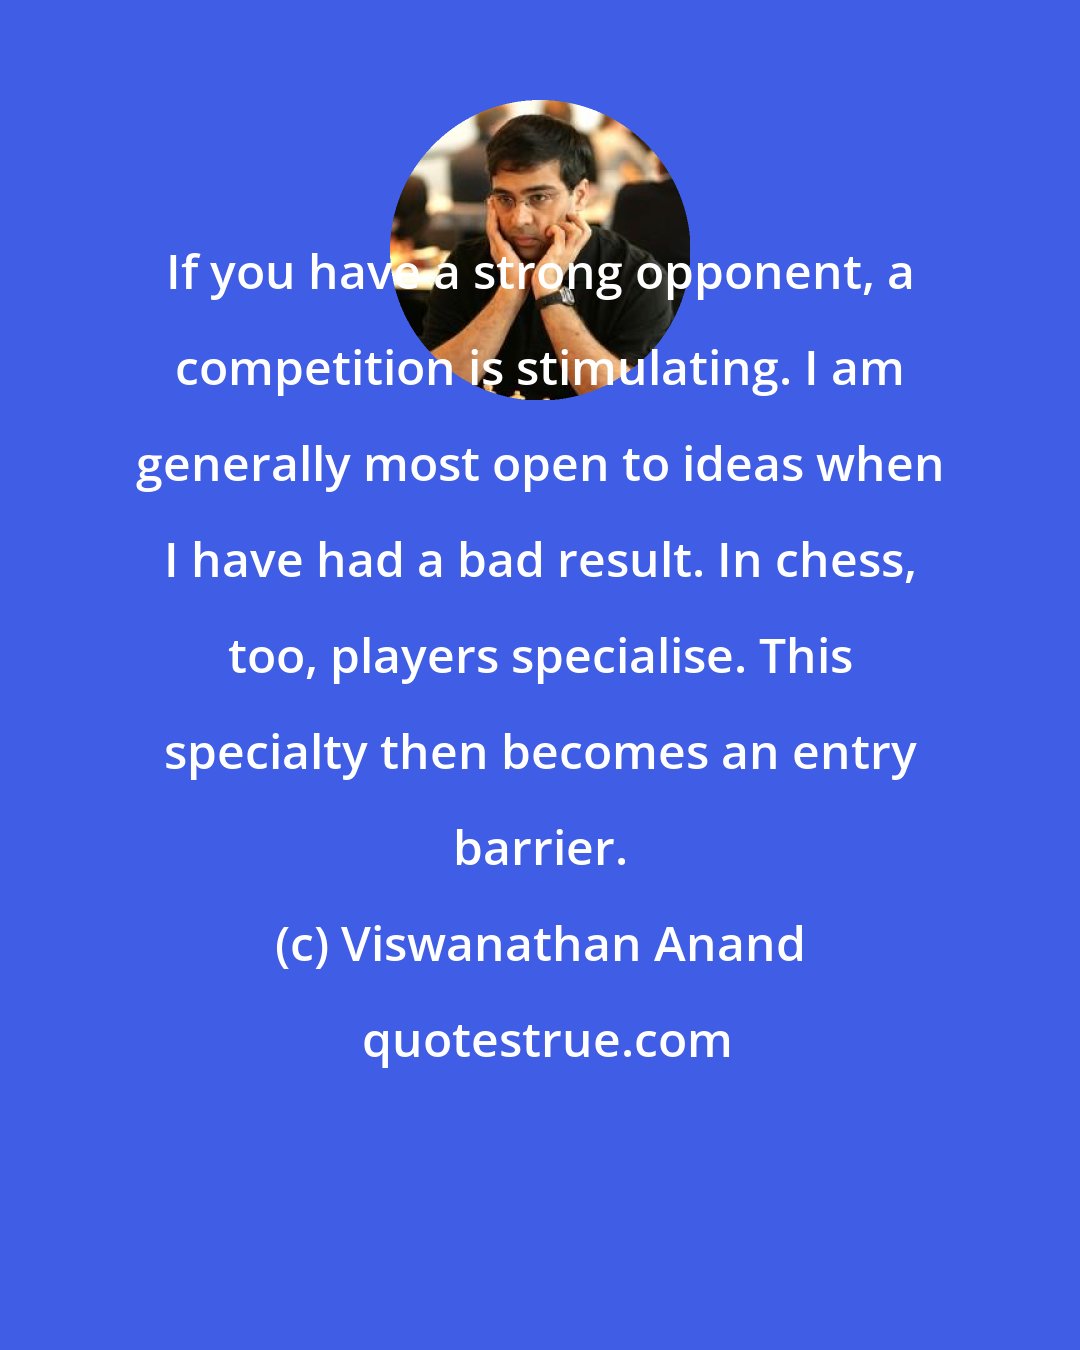 Viswanathan Anand: If you have a strong opponent, a competition is stimulating. I am generally most open to ideas when I have had a bad result. In chess, too, players specialise. This specialty then becomes an entry barrier.